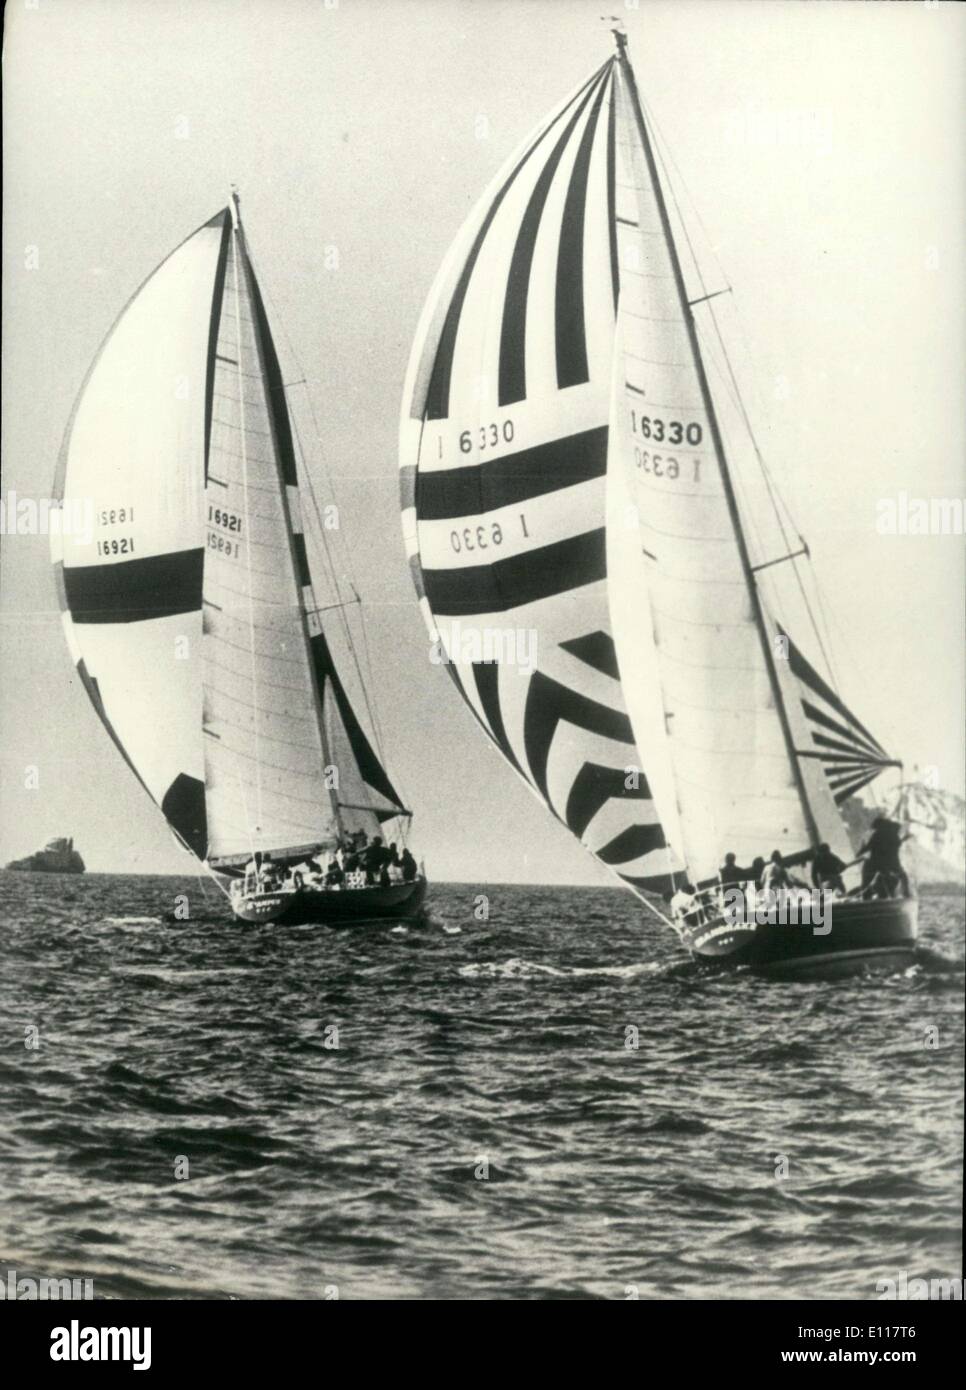 Mar. 31, 1976 - ''Grampus'' and Andy McGowan's ''Mandrake in Nautical Race Stock Photo